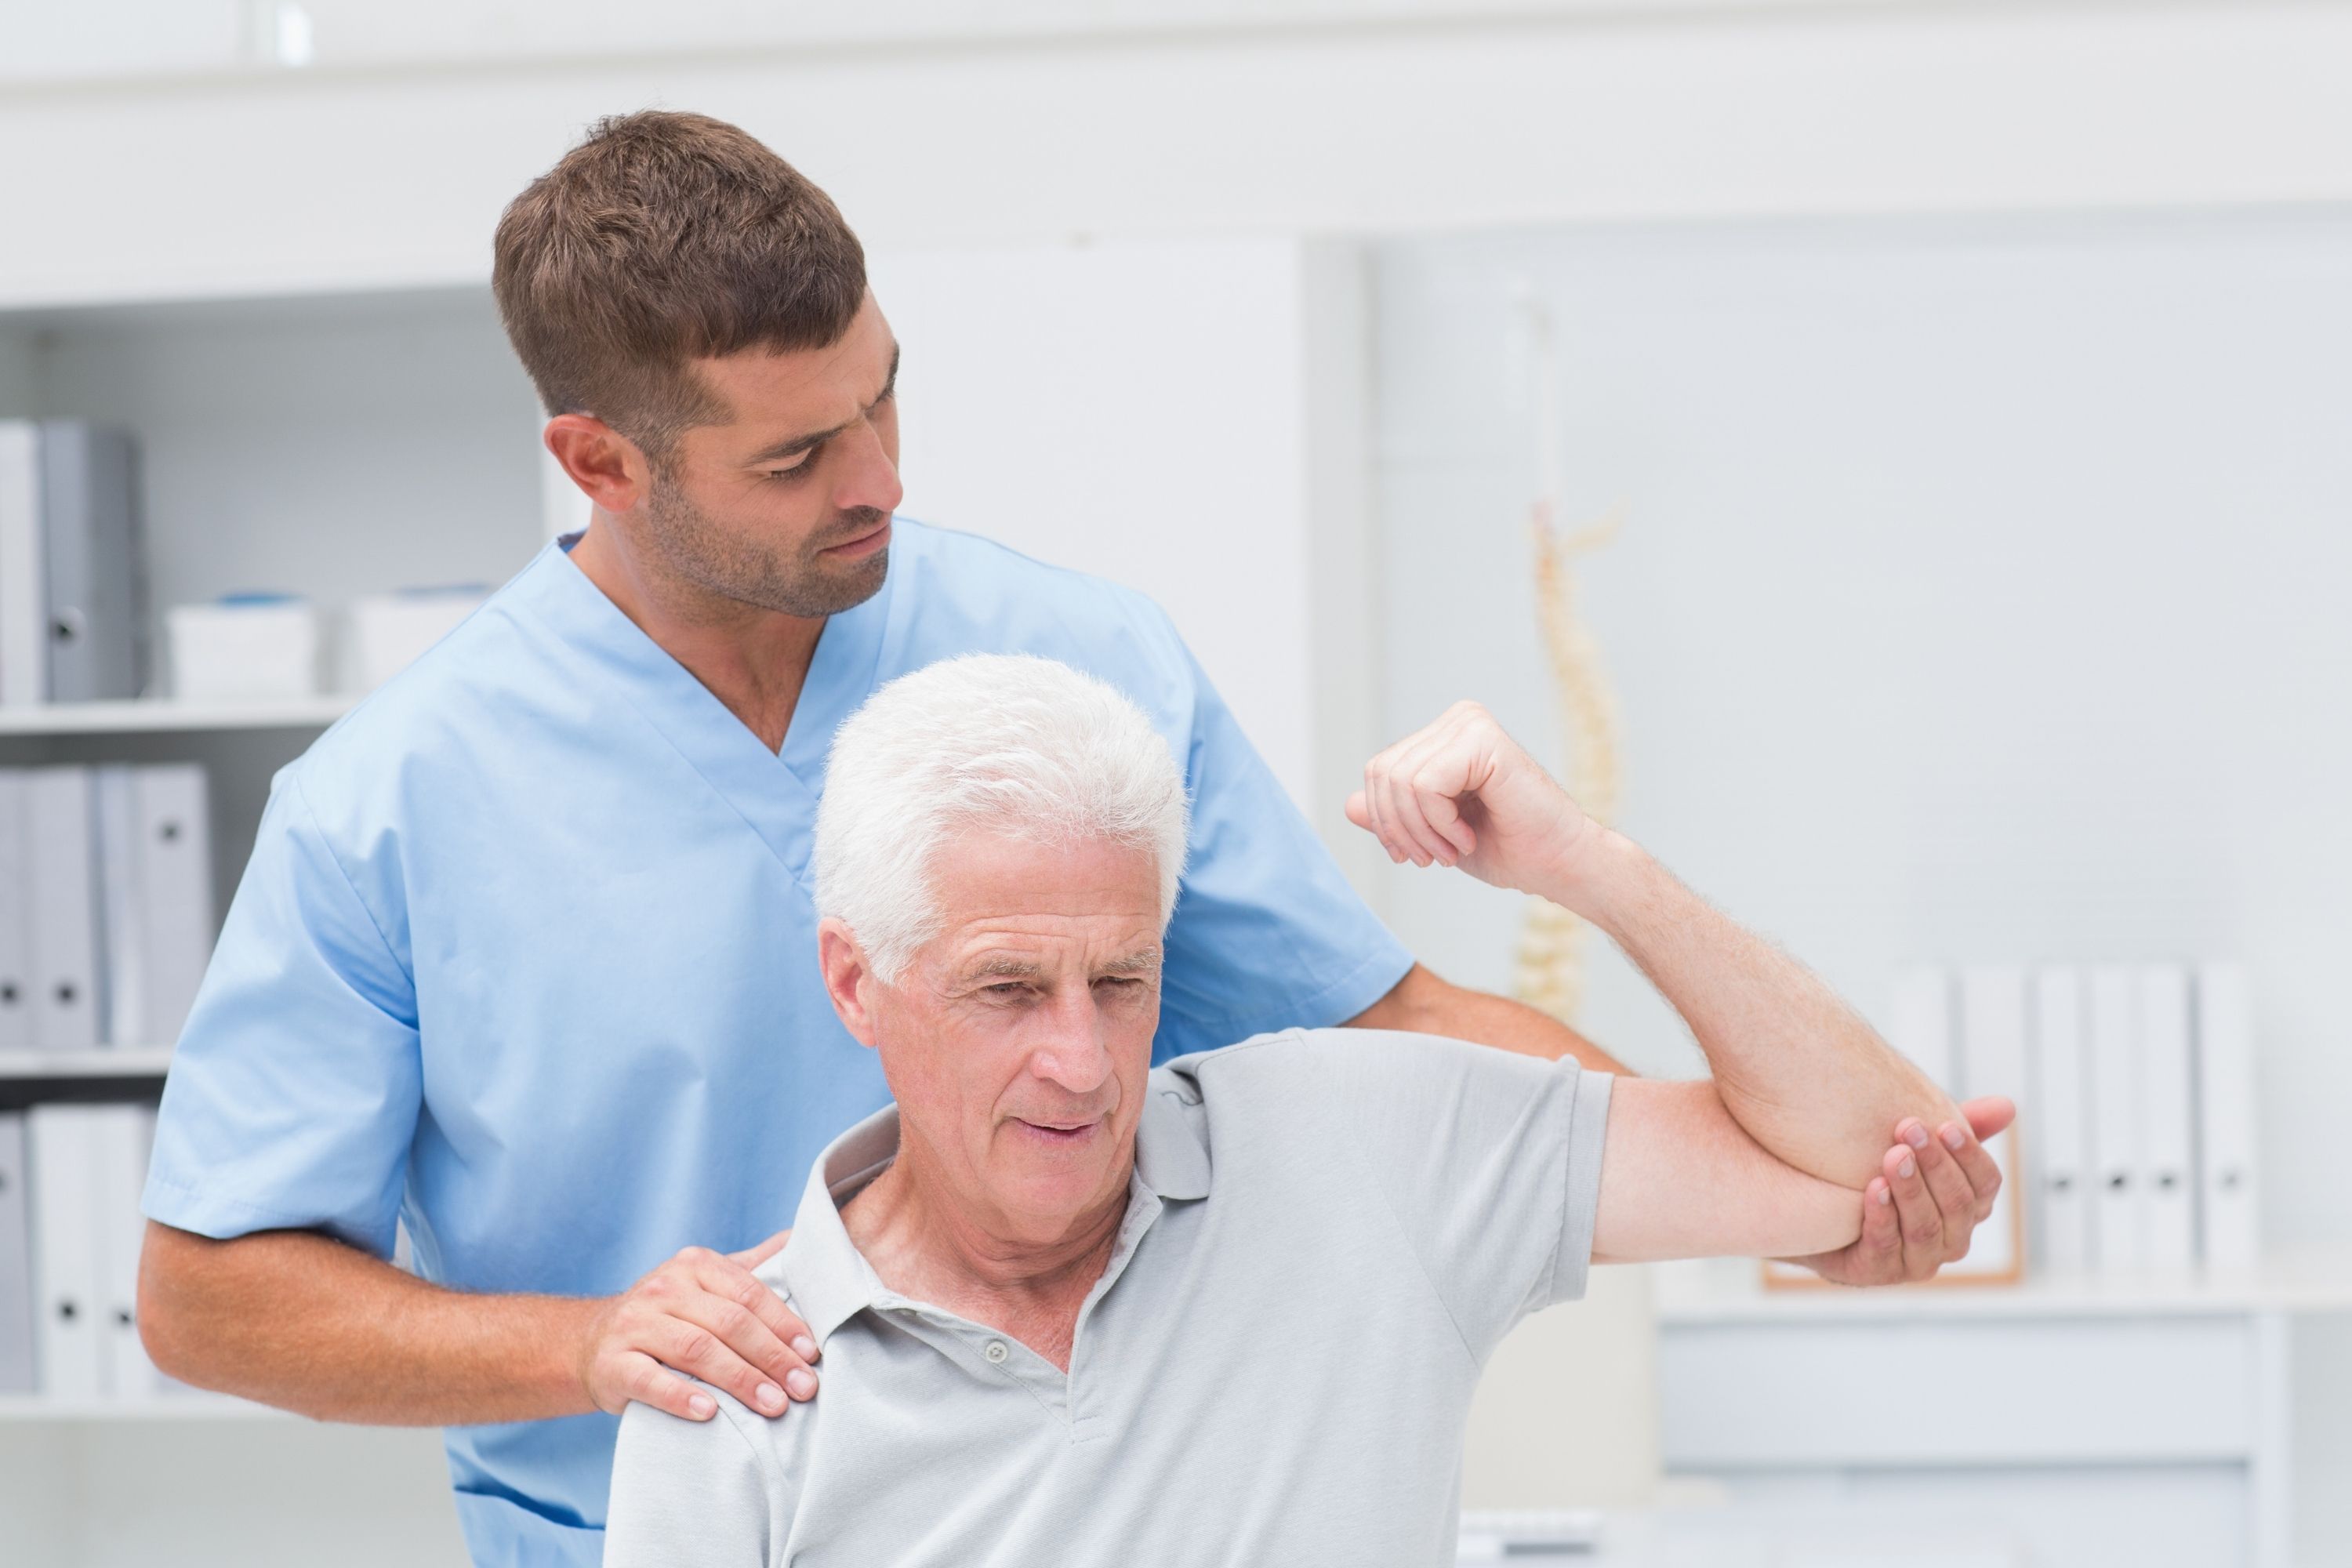 What to Wear to Physical Therapy For a Shoulder